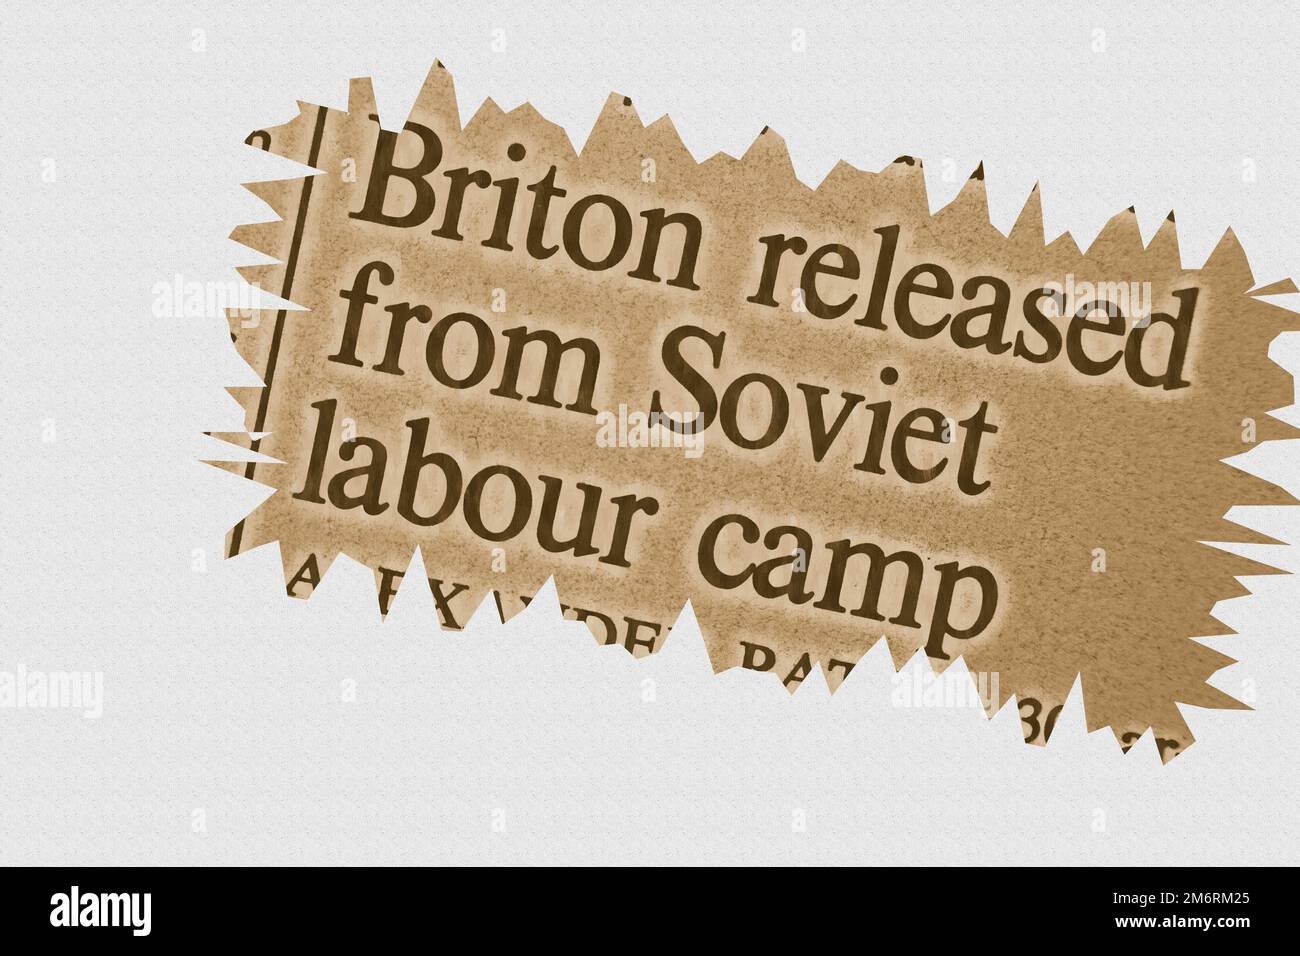 Briton released from Soviet labour camp - news story from 1975 newspaper headline article title with overlay highlight Stock Photo